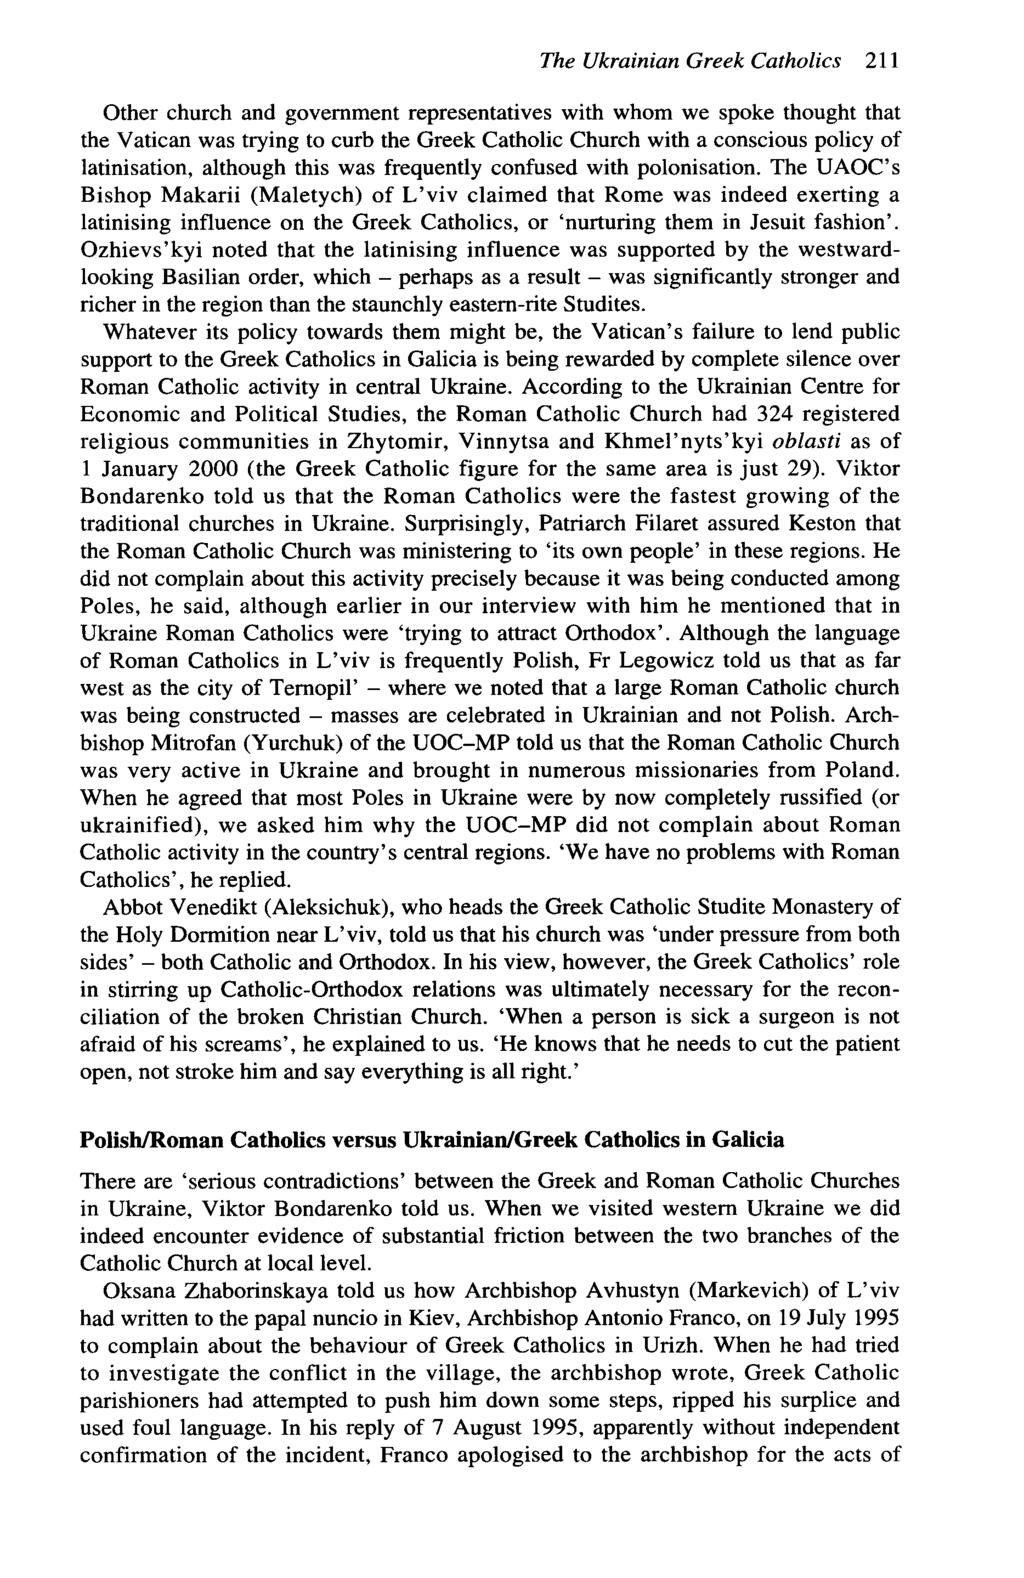 The Ukrainian Greek Catholics 211 Other church and government representatives with whom we spoke thought that the Vatican was trying to curb the Greek Catholic Church with a conscious policy of